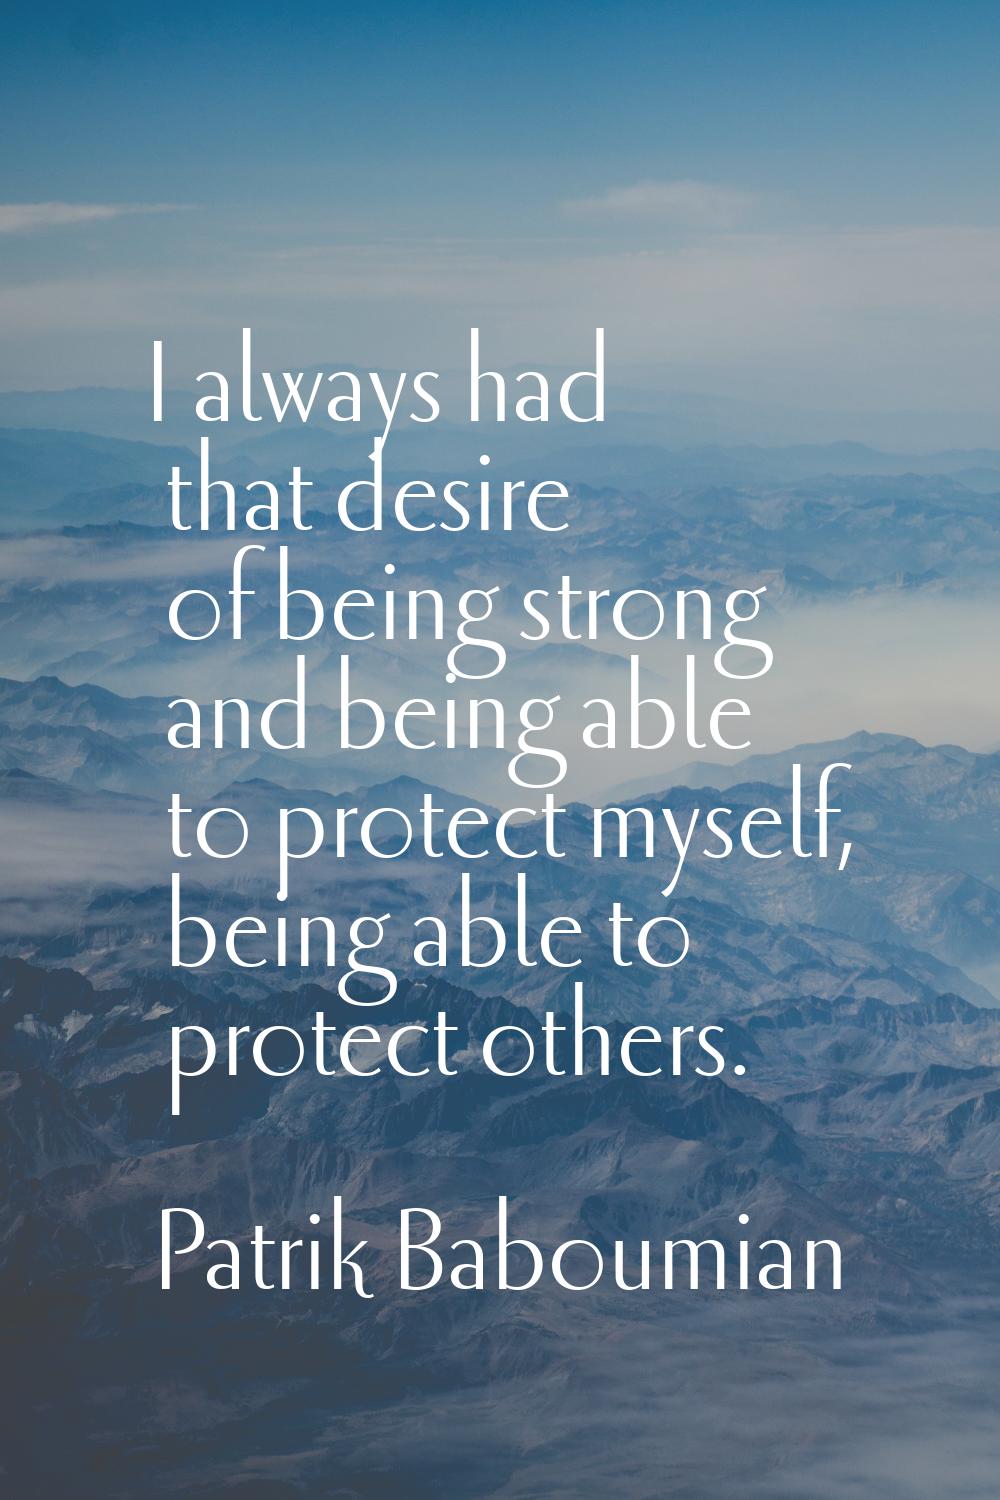 I always had that desire of being strong and being able to protect myself, being able to protect ot